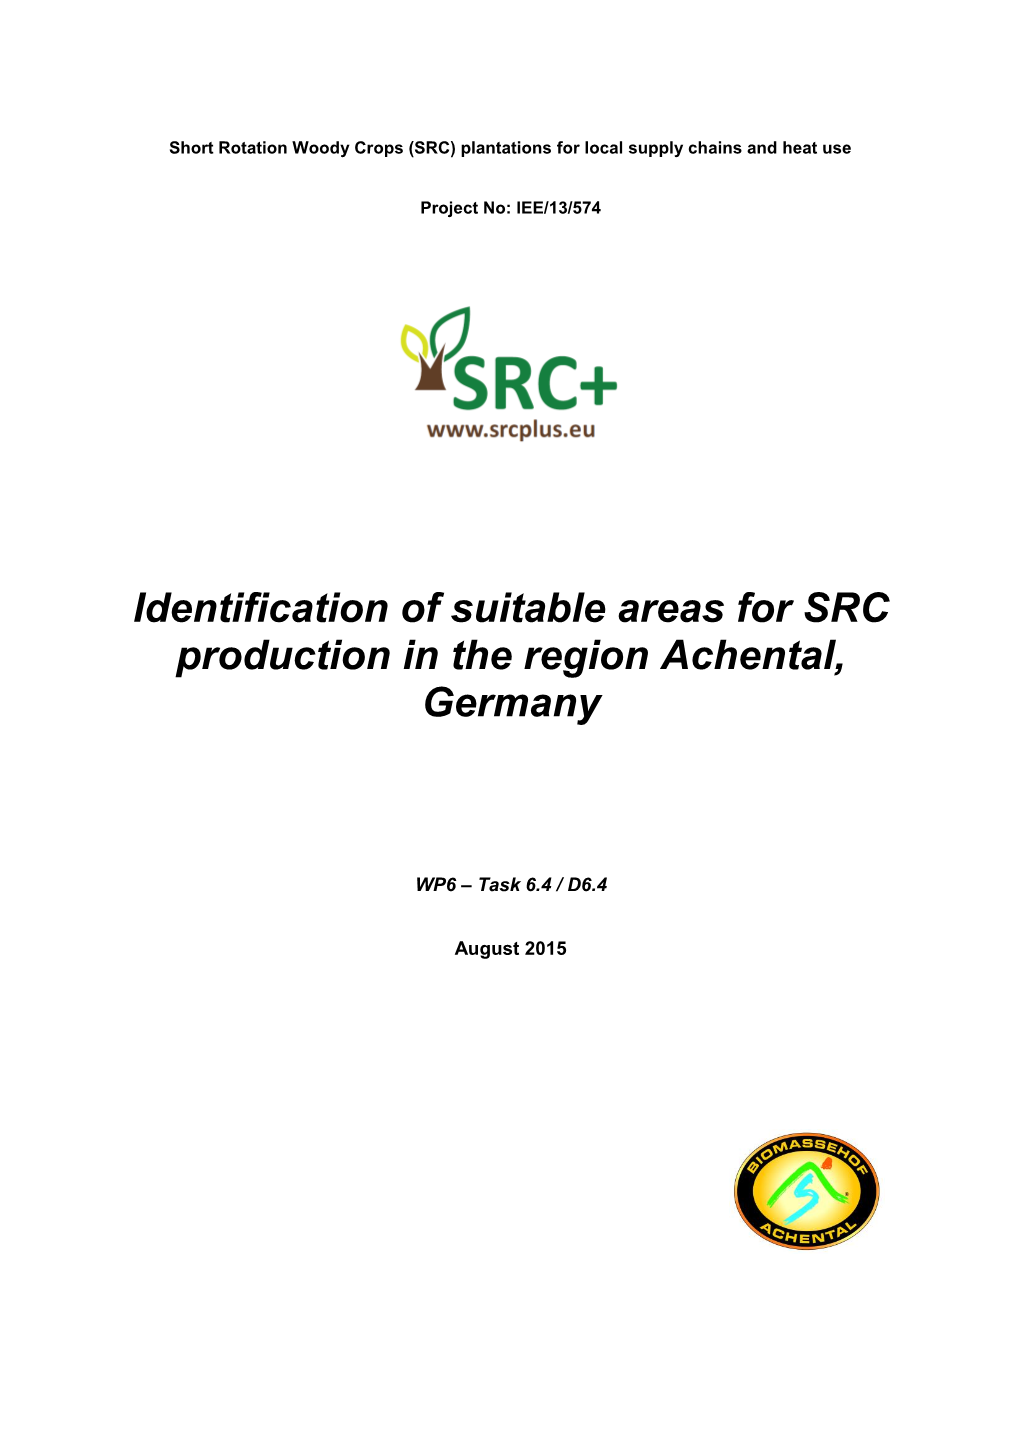 Identification of Suitable Areas for SRC Production in the Region Achental, Germany